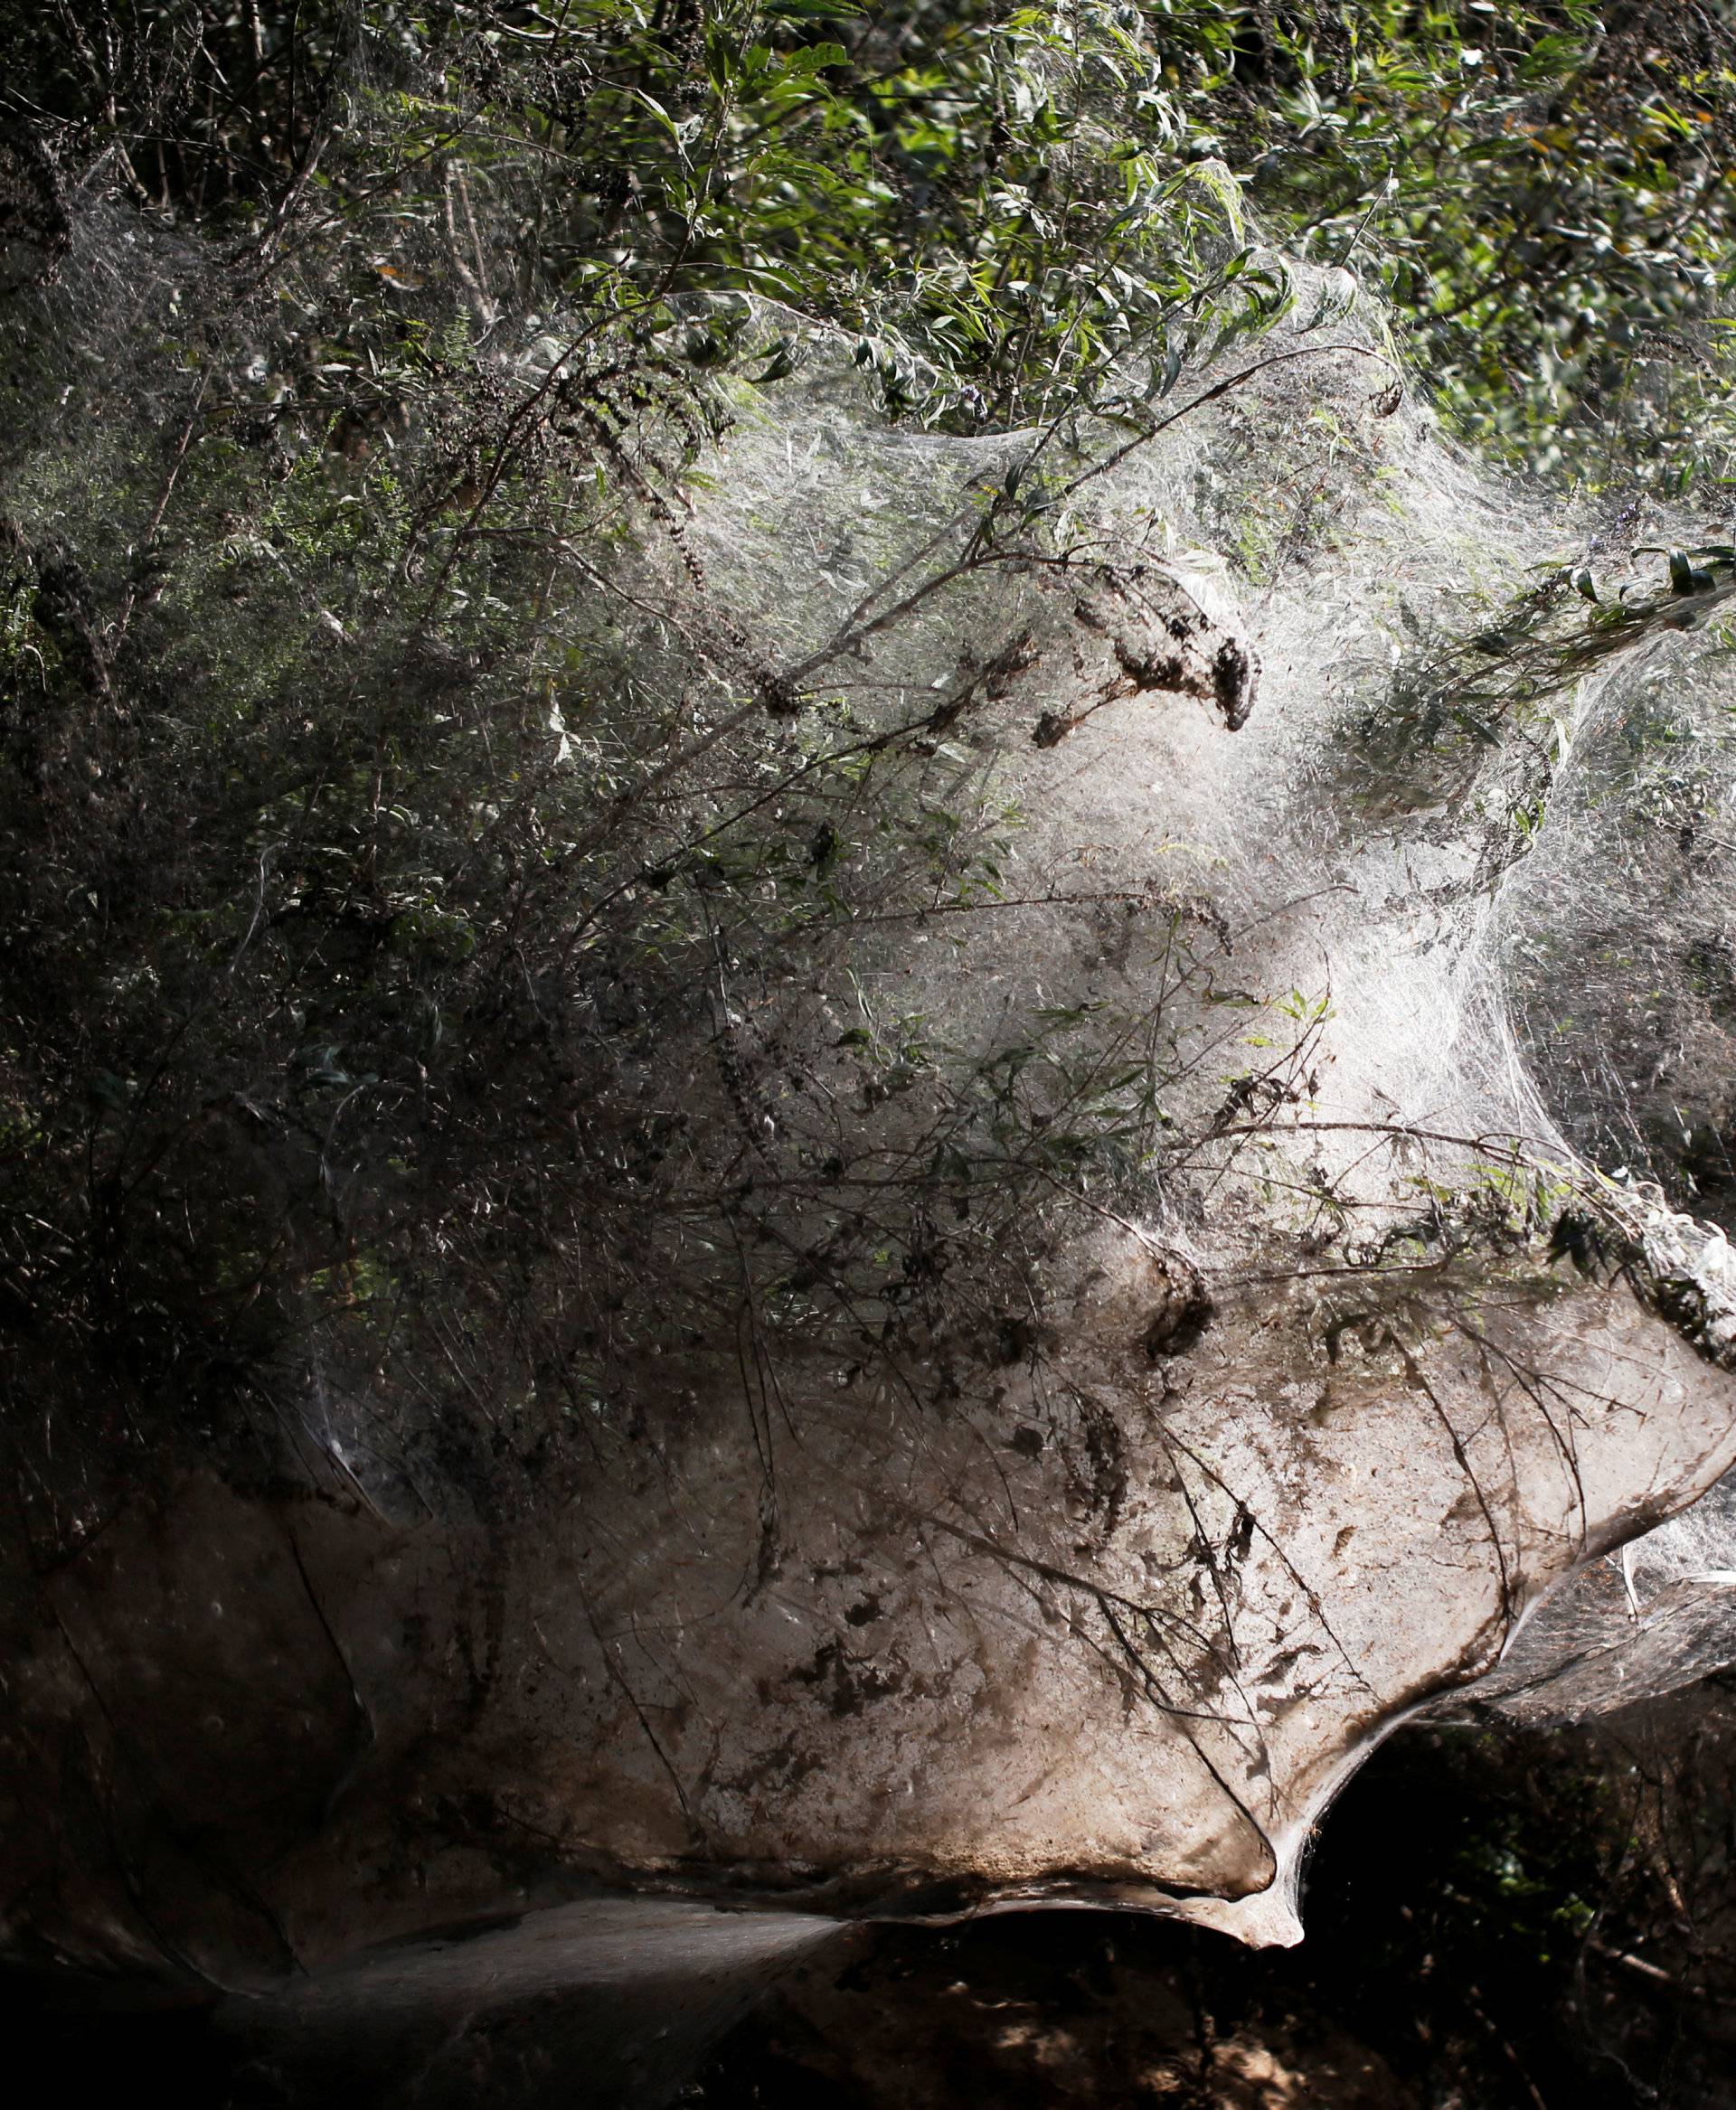 Giant spider webs, spun by long-jawed spiders (Tetragnatha), cover sections of the vegetation along the Soreq creek bank, near Jerusalem